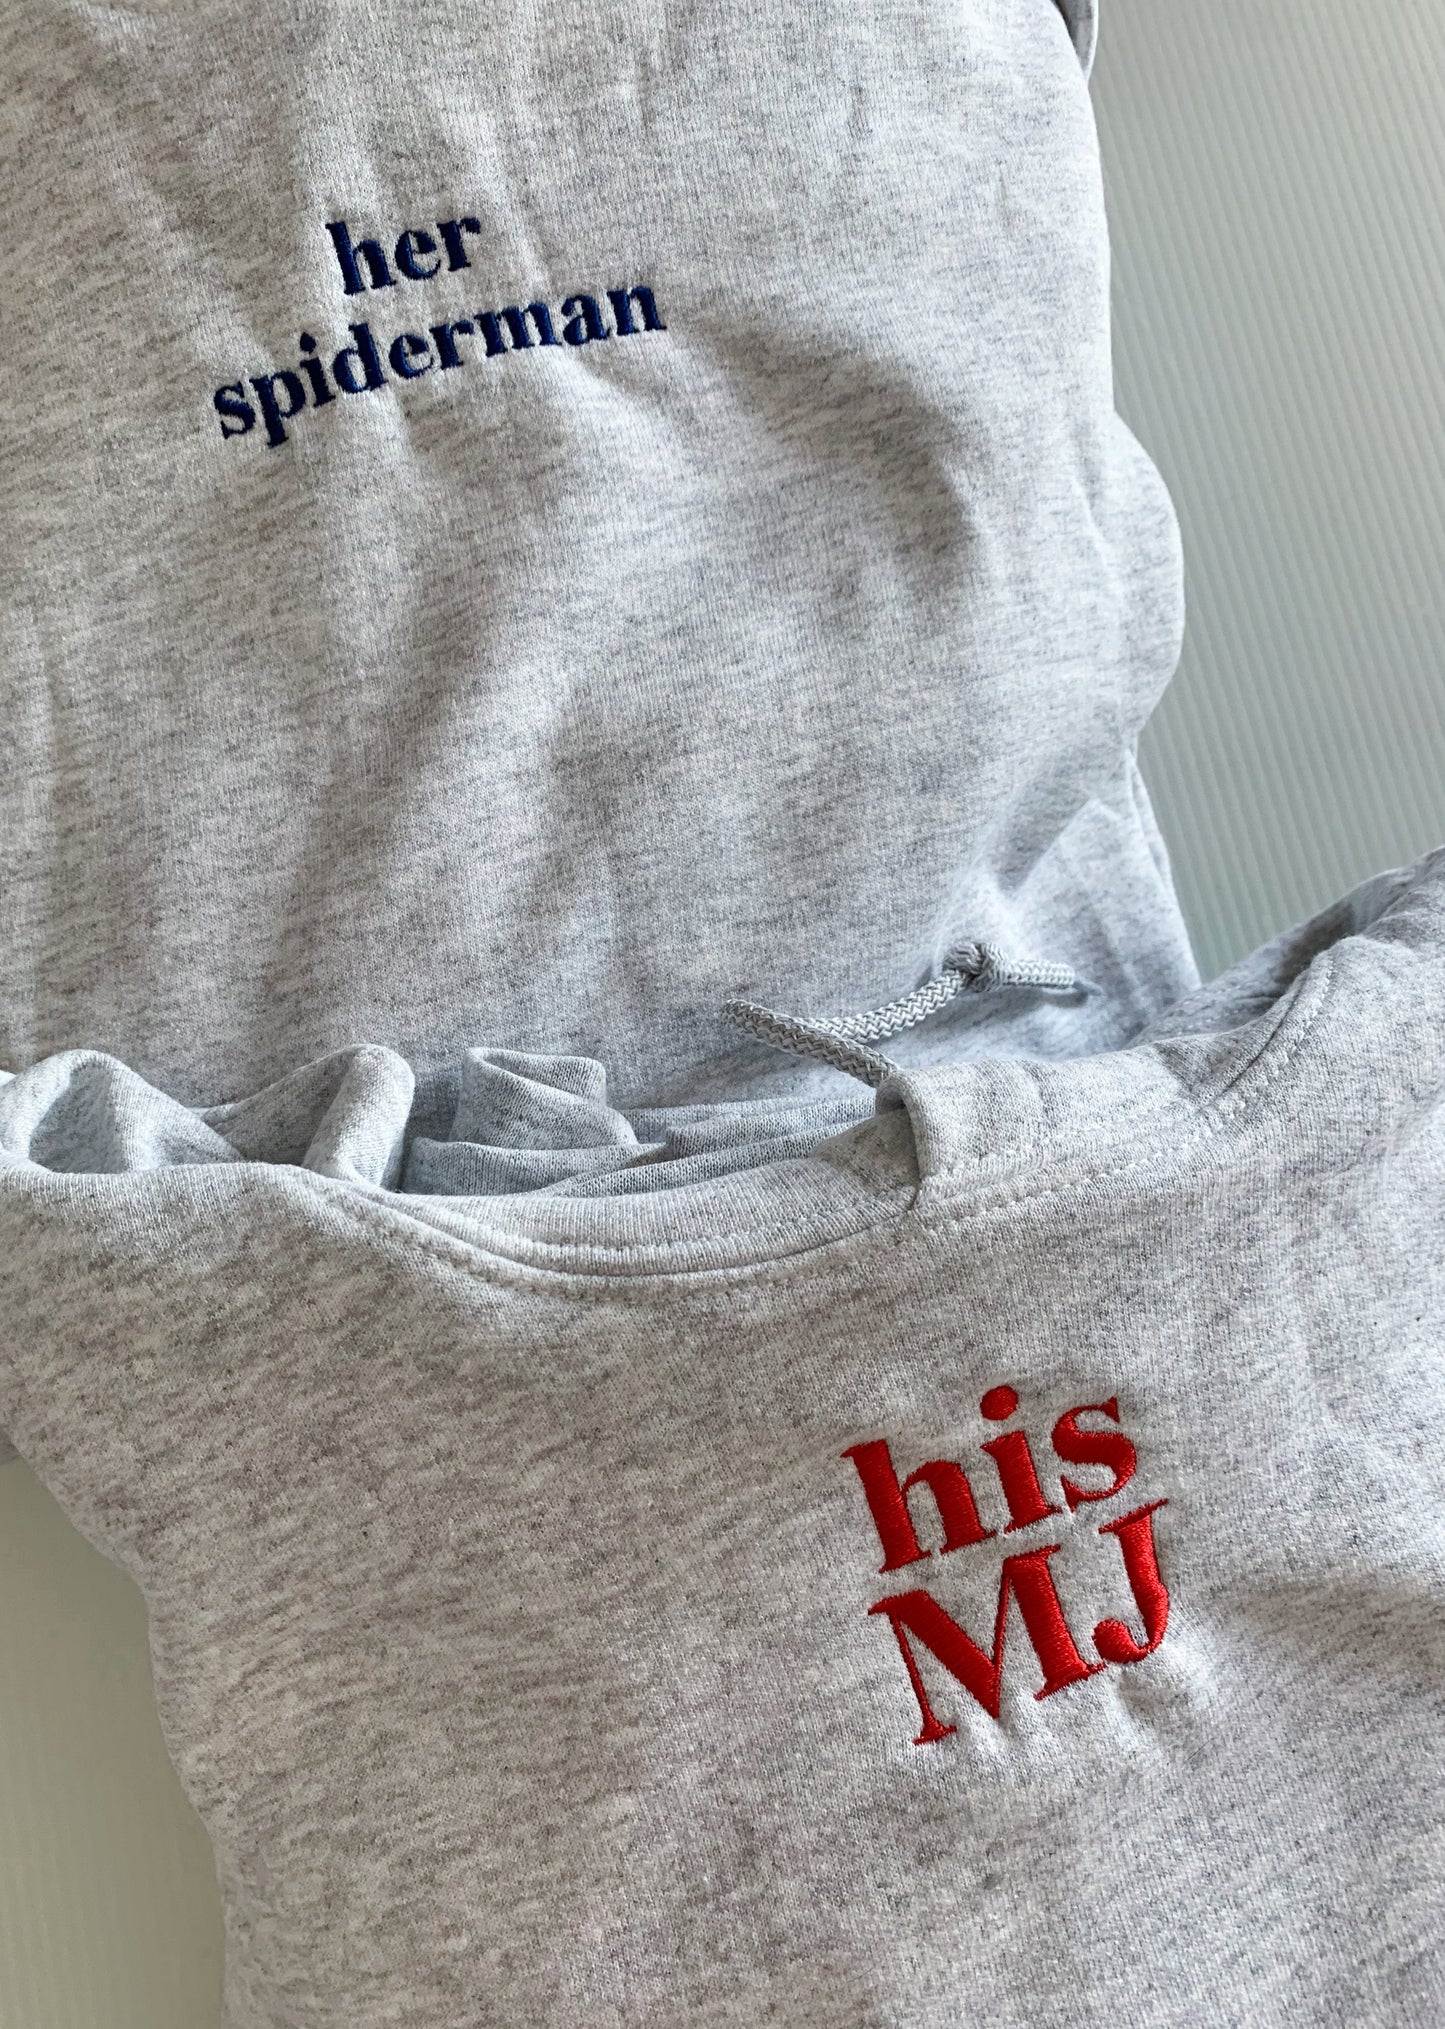 "her Spiderman" "his MJ" Embroidered Matching Set